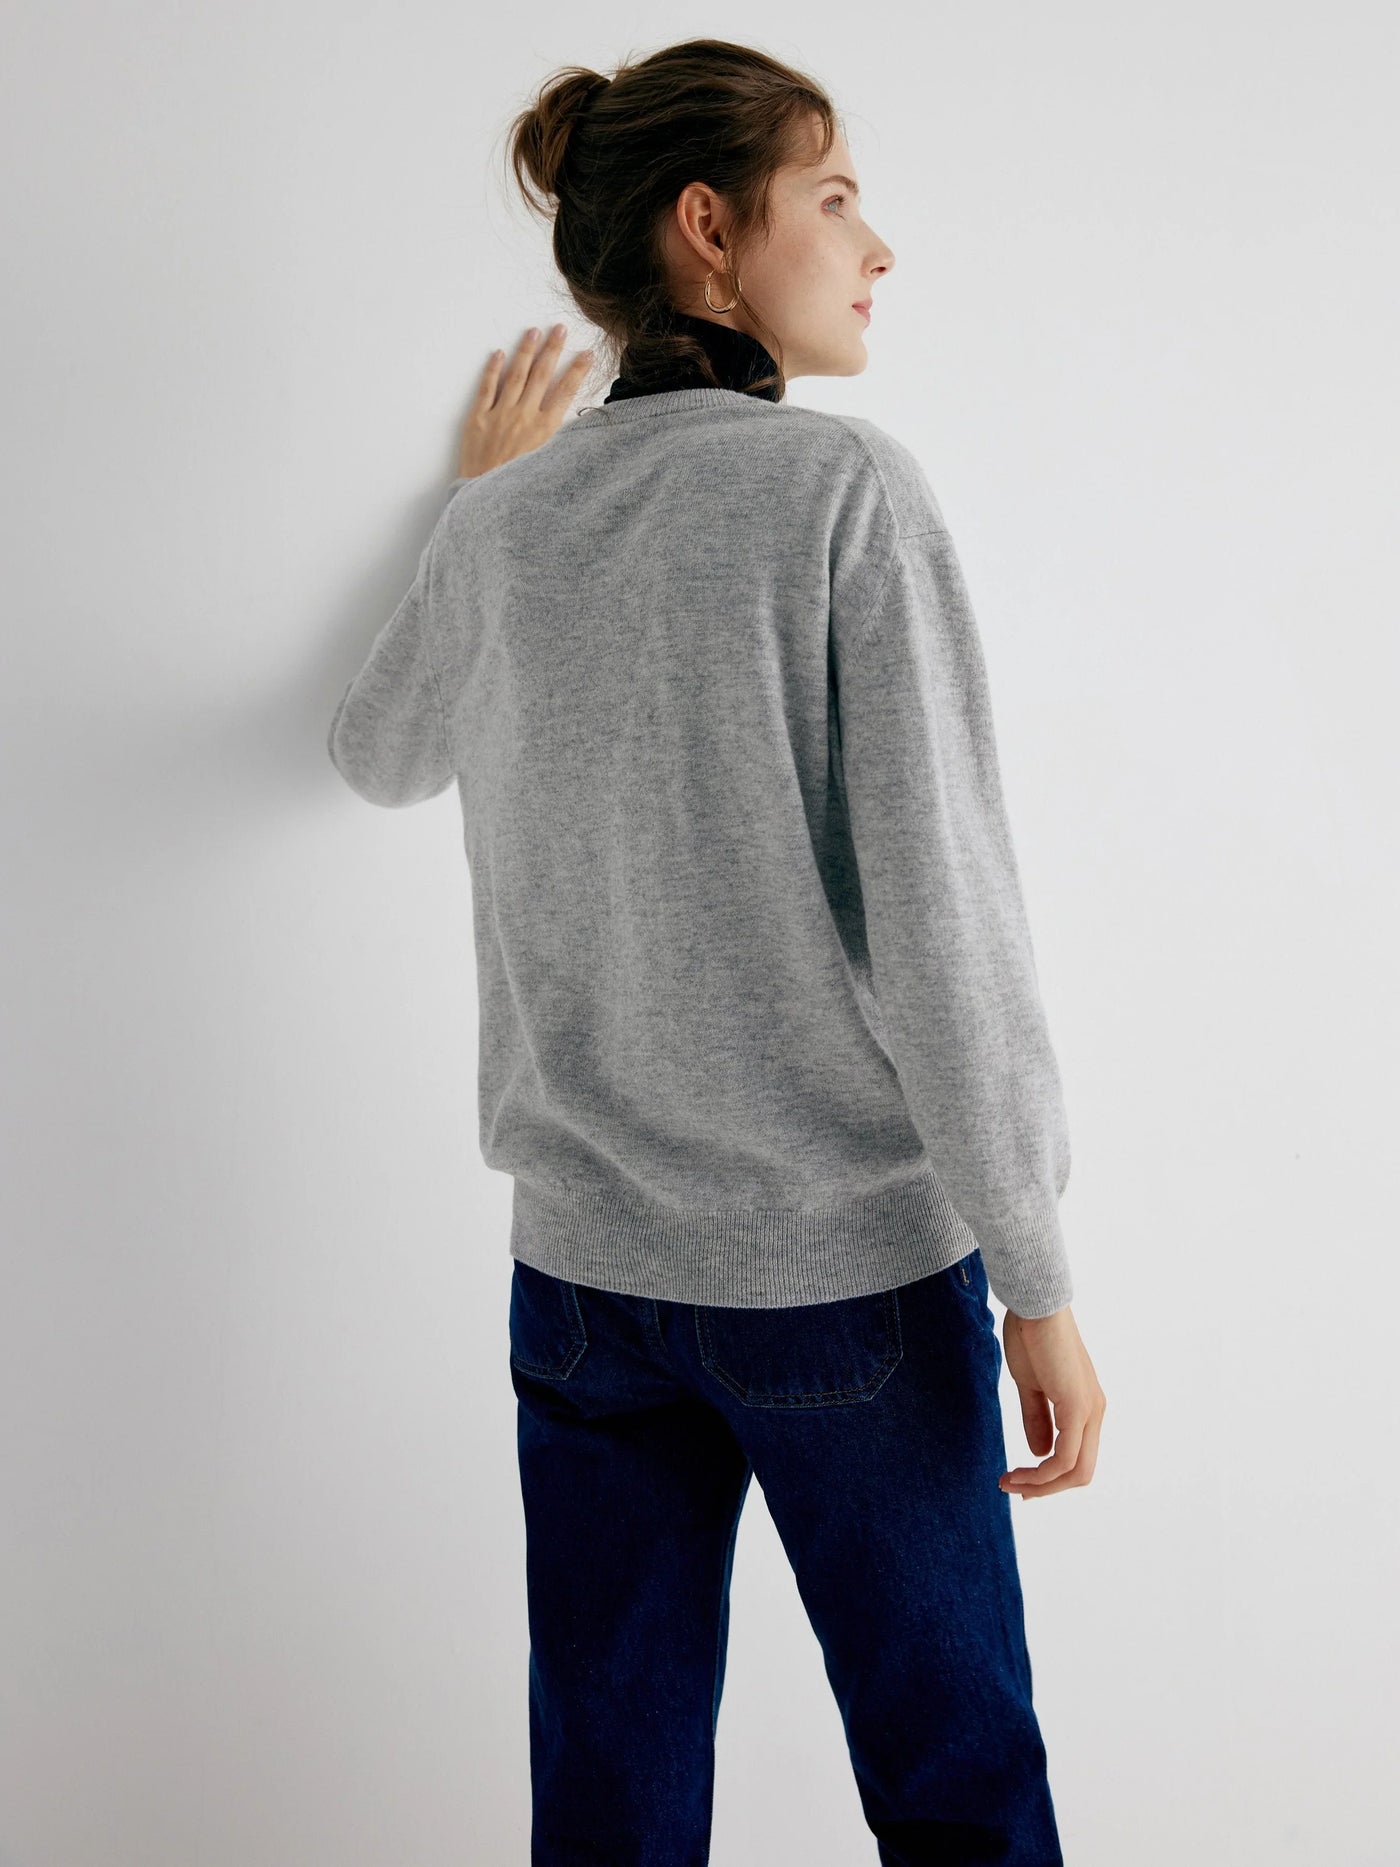 Esme 100% Merino Wool Grey V-Neck Relaxed Fit Pullover